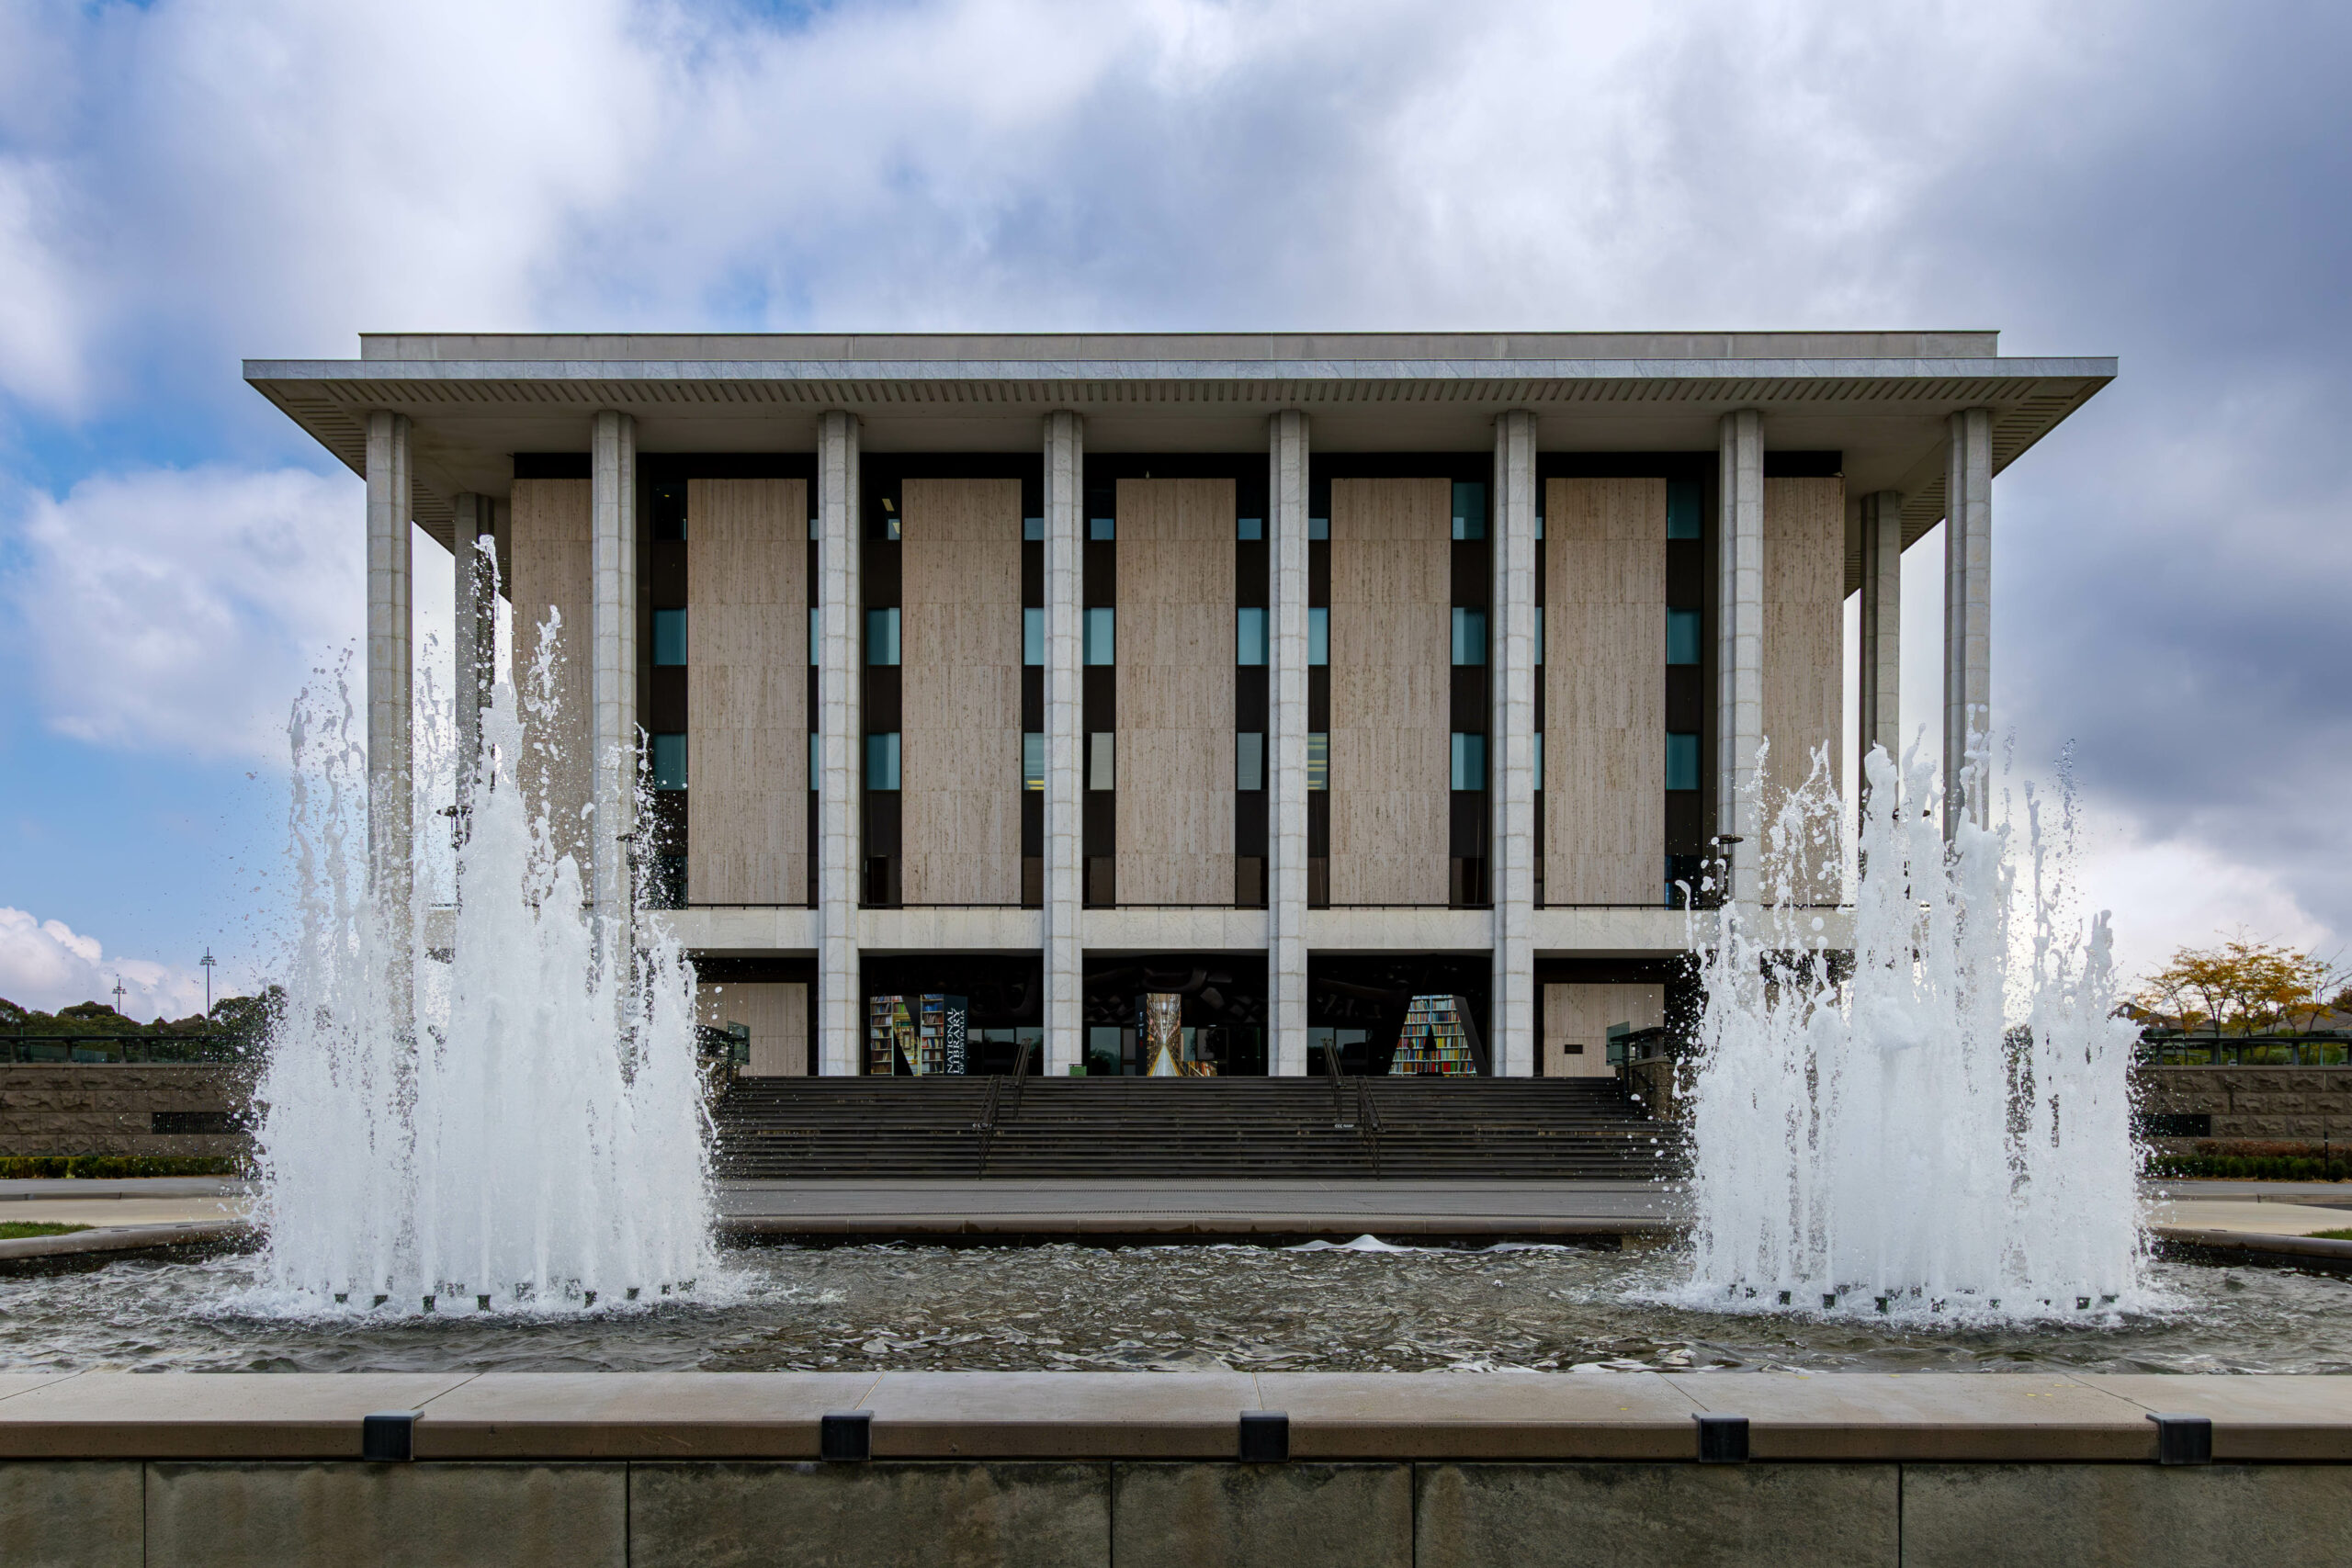 A modernist building of eight columns, based on a classical design, with two water fountains at the front